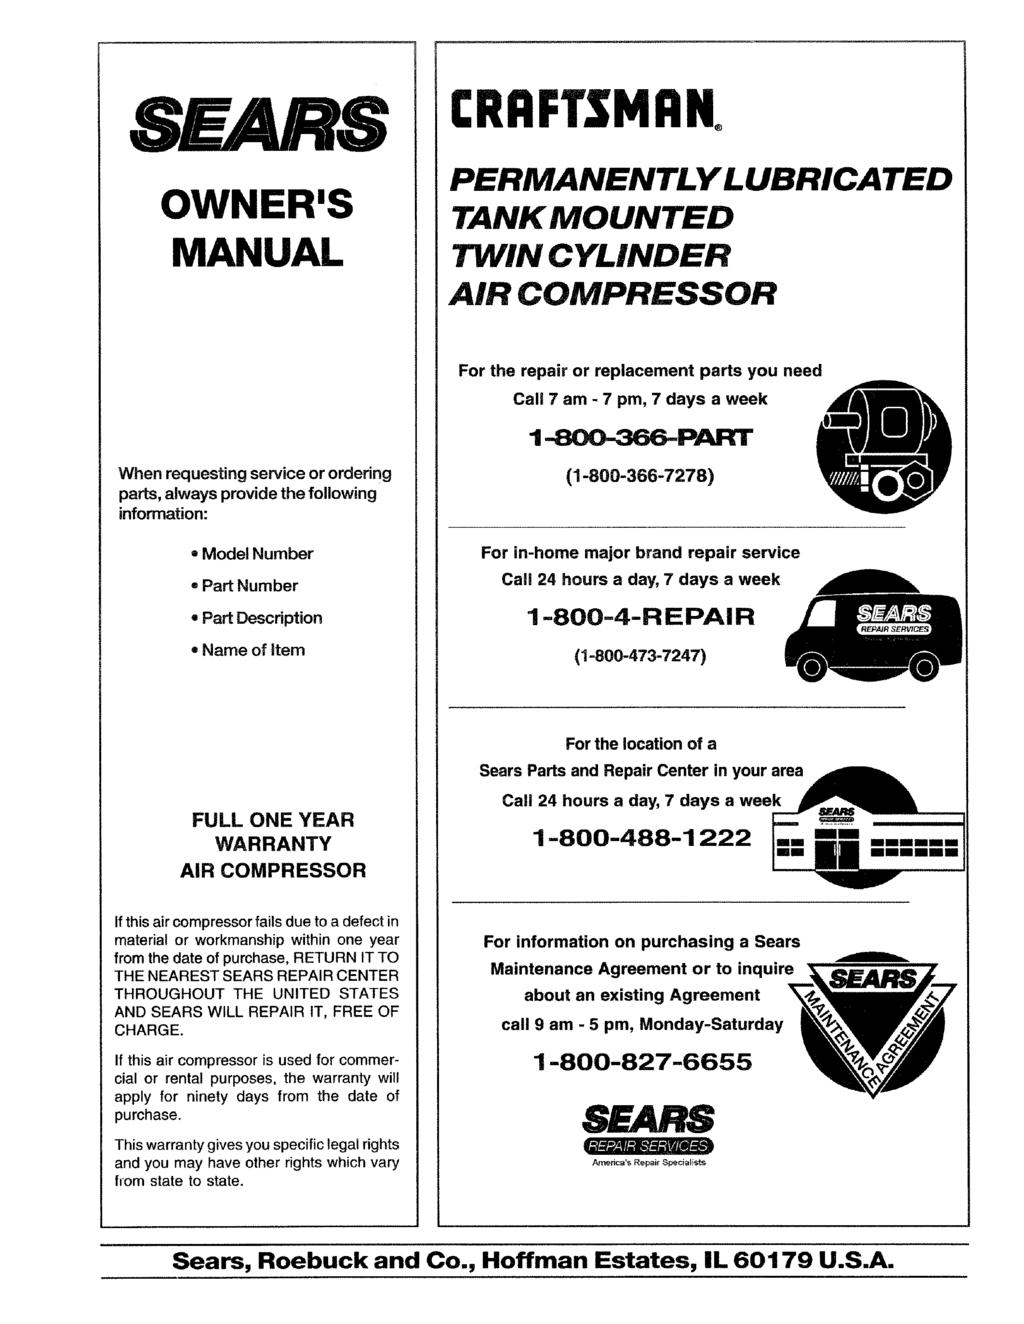 SEARS CRRFTSMRNo OWNER'S MANUAL PERMANENTLY TANK MOUNTED TWIN CYLINDER AIR COMPRESSOR LUBRICATED For the repair or replacement parts you need Call 7 am - 7 pm, 7 days a week When requesting service